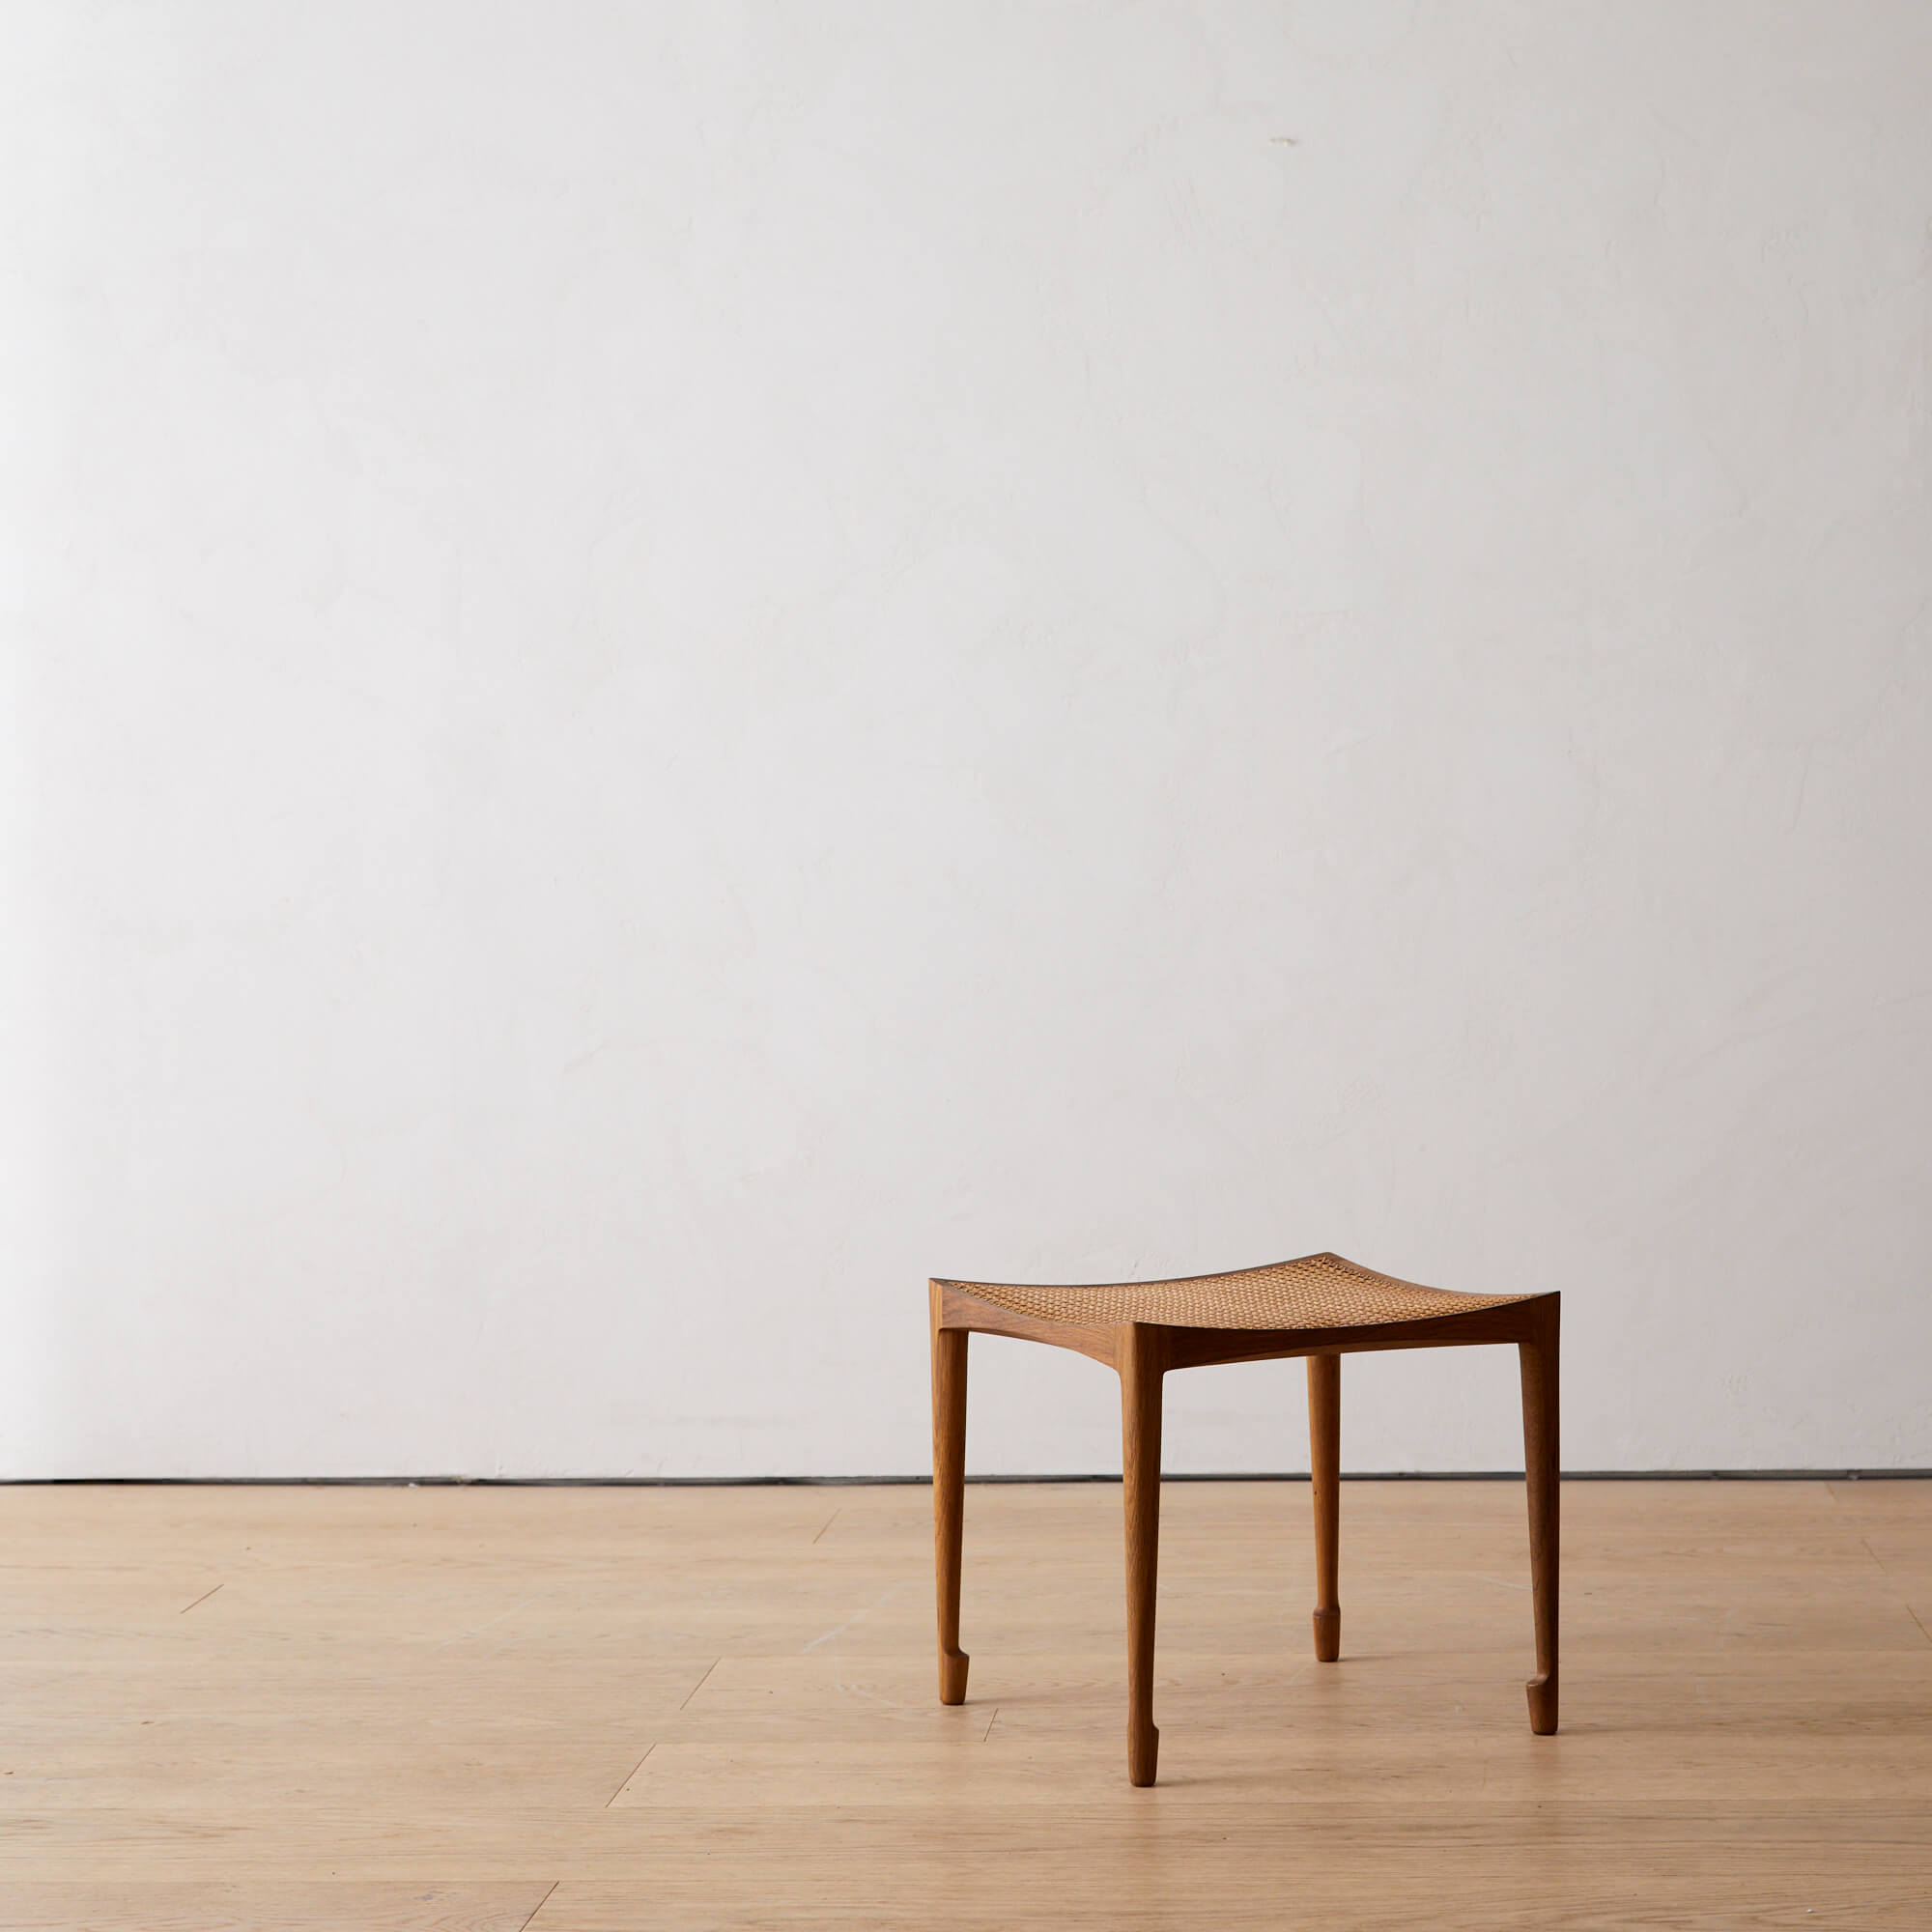 Oak and cane stool by Bernt Petersen